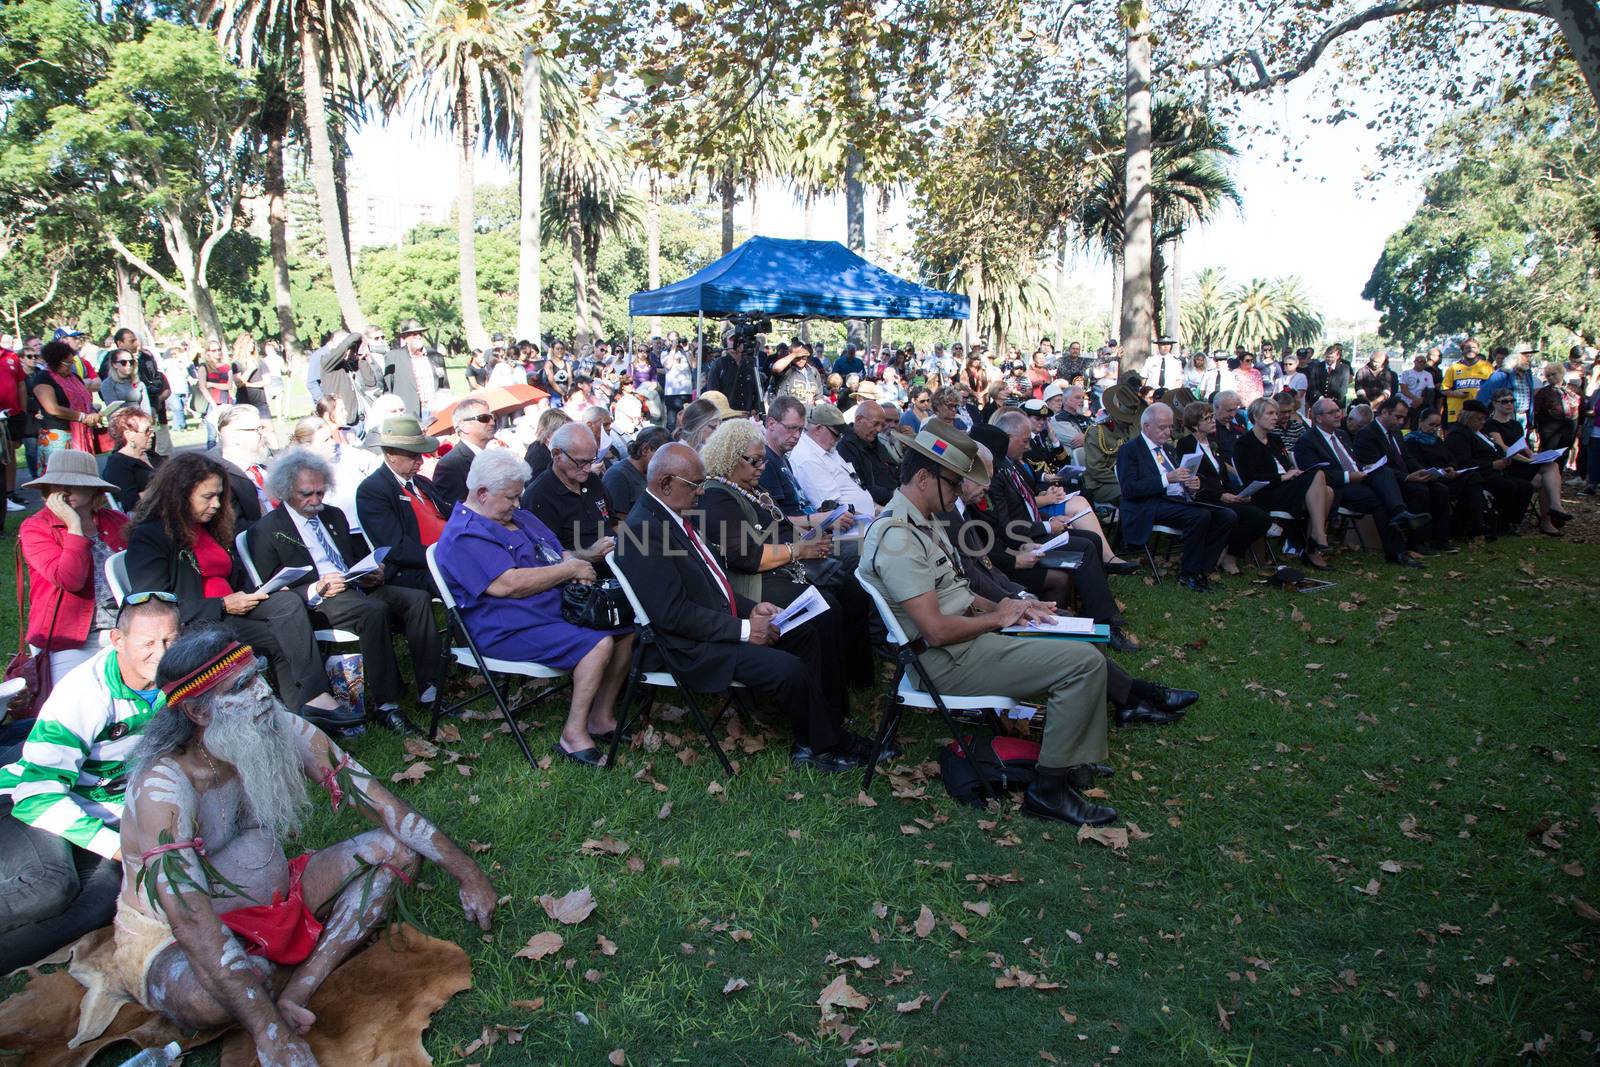 AUSTRALIA, Redfern: About 500 people gather at The Block in Redfern, Sydney, for the 10th Coloured Digger Anzac Day march on April 25, 2016 to honour their forebears who fought in the Battle of the Somme a century ago. In Redfern, this is the 10th year a Coloured digger march is organized to honour the role the Aboriginal and Torres Strait Islander service men and women play in the battle. 